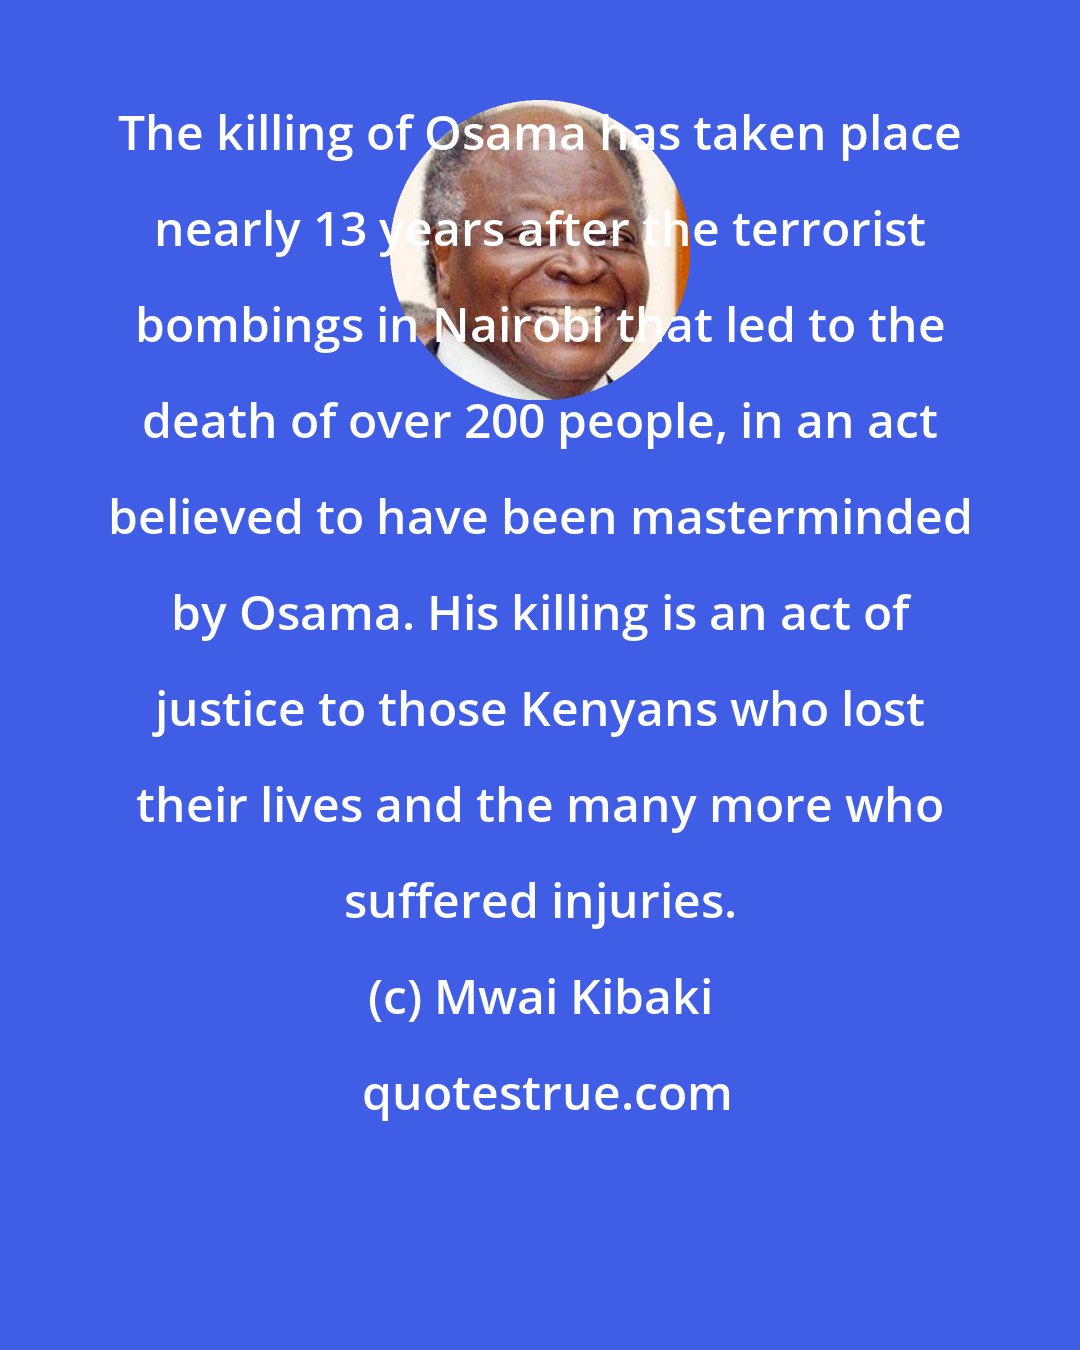 Mwai Kibaki: The killing of Osama has taken place nearly 13 years after the terrorist bombings in Nairobi that led to the death of over 200 people, in an act believed to have been masterminded by Osama. His killing is an act of justice to those Kenyans who lost their lives and the many more who suffered injuries.